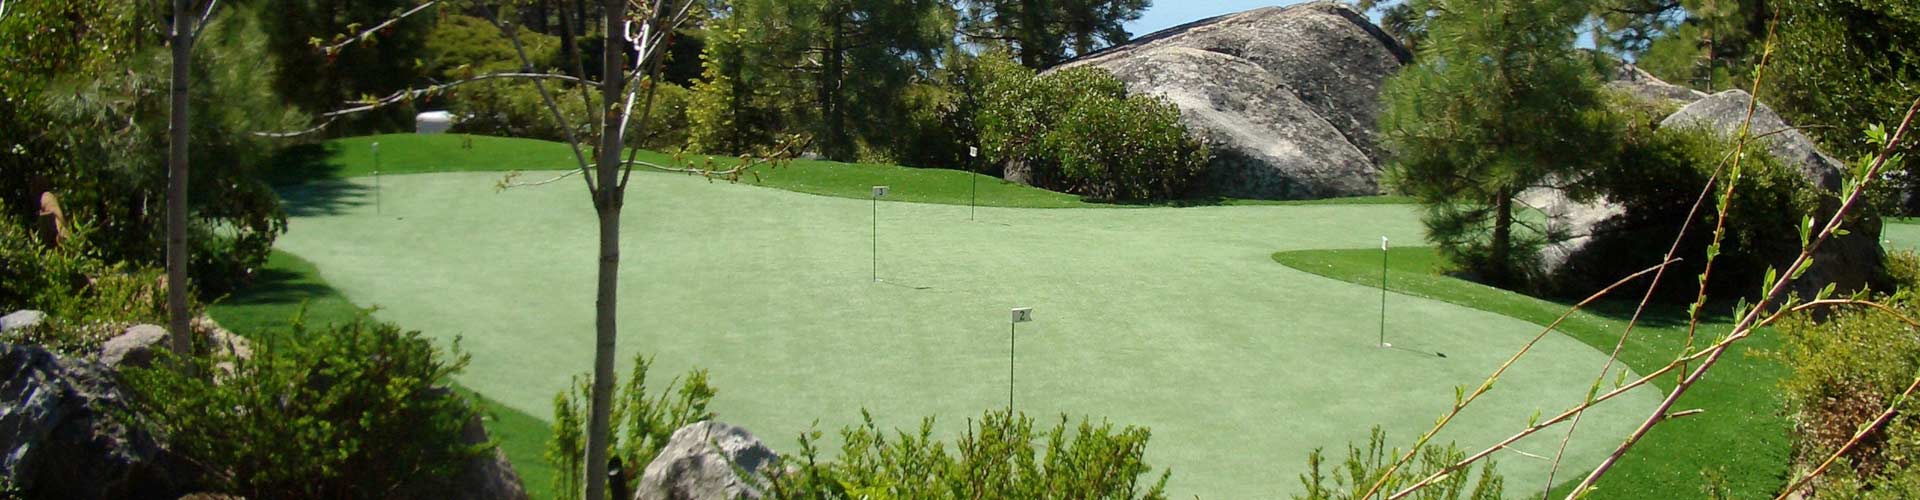 More Than Just Backyard Putting Green Installation in New ...